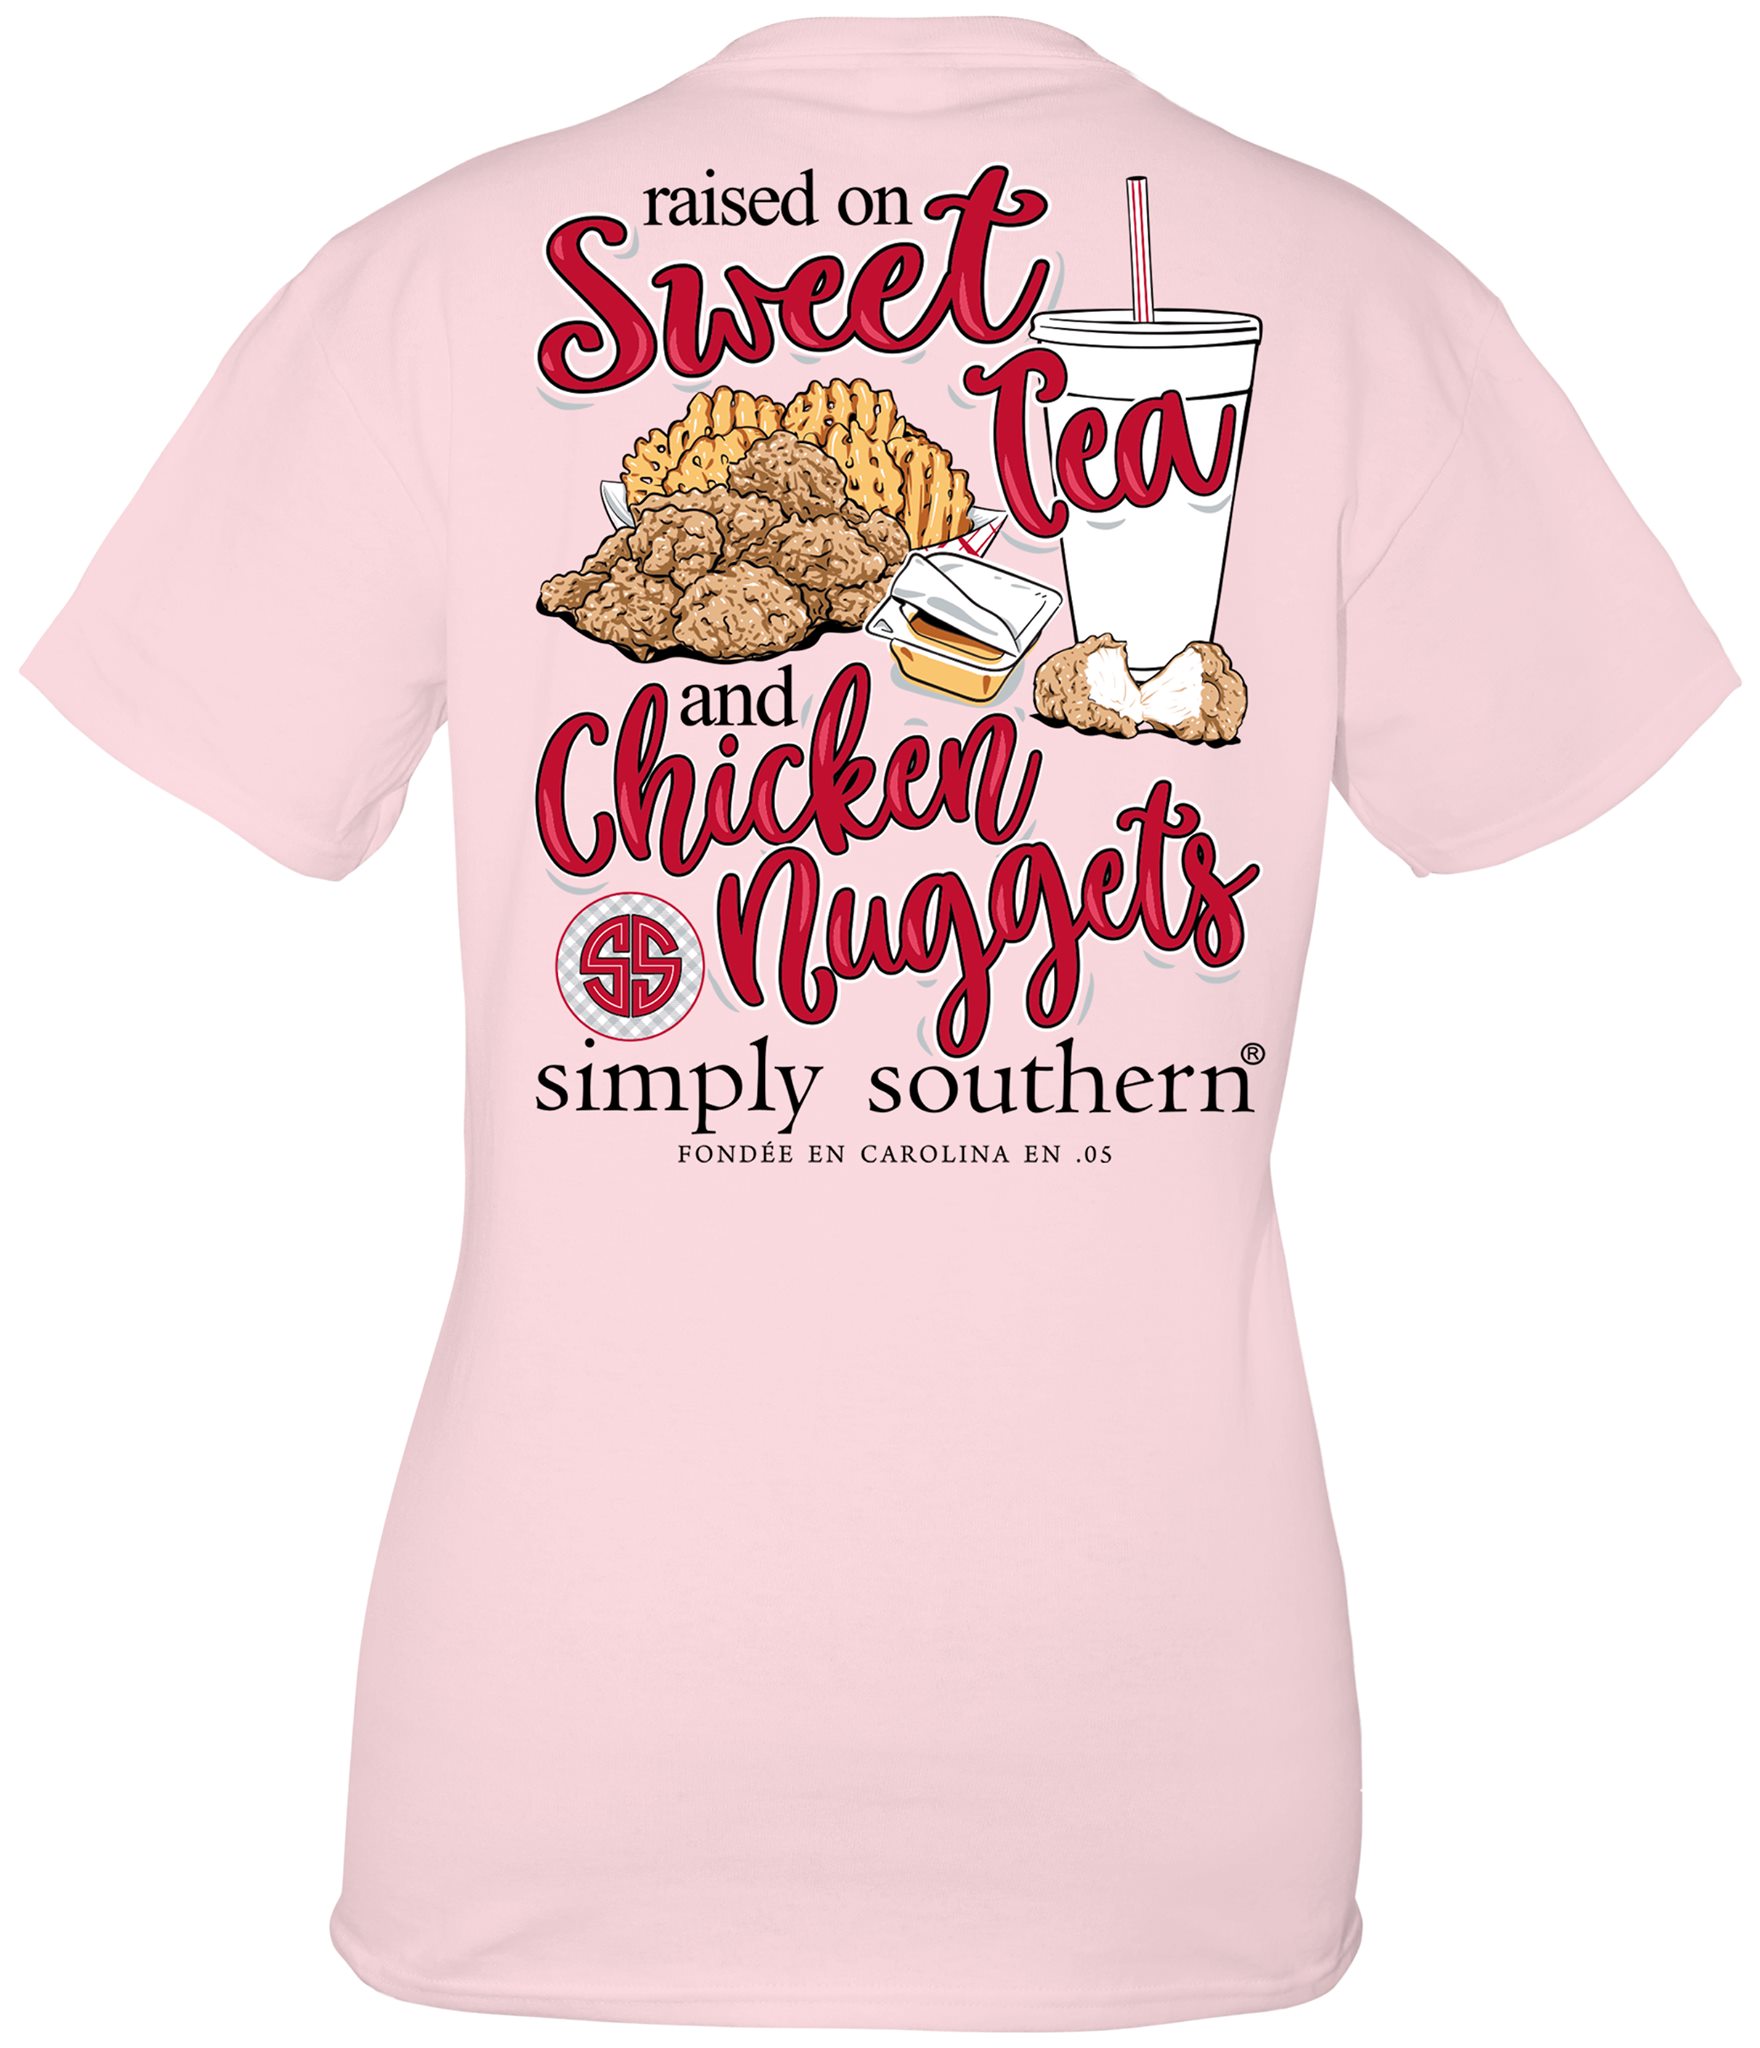 Raised on sweet tea and chiken nuggets simply southern